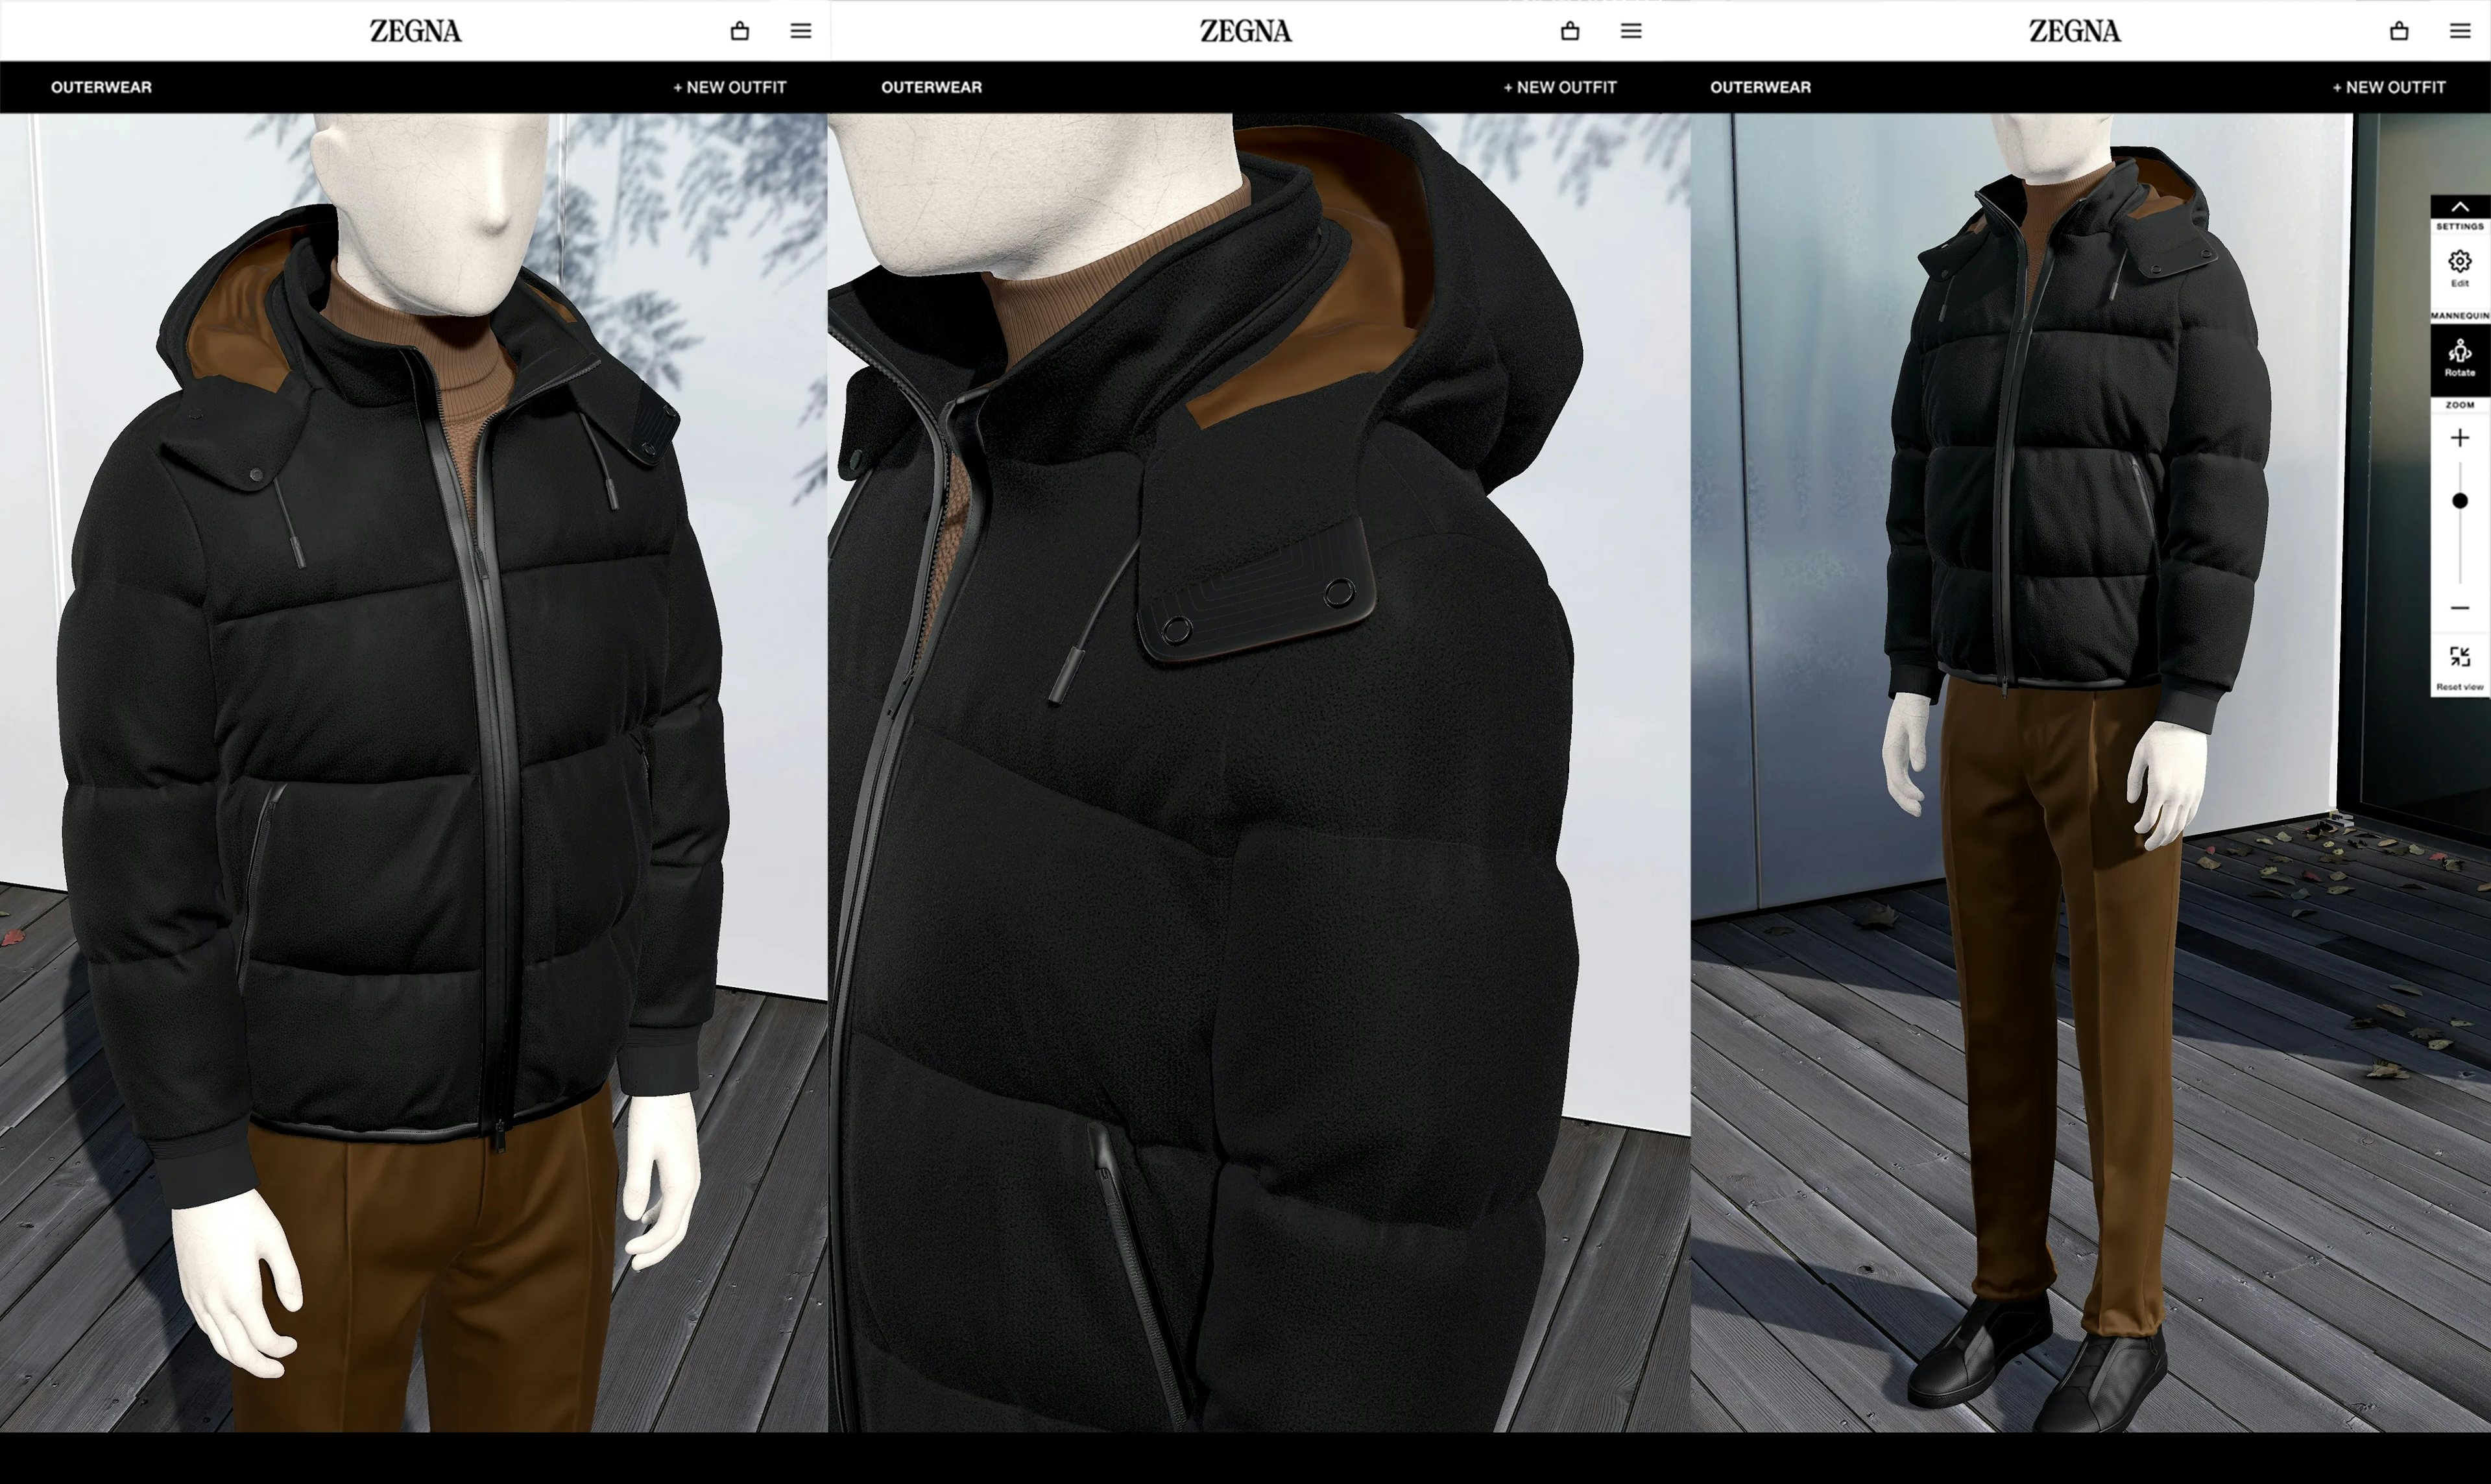 The Zegna X configurator allows consumers to customize any look from the brand's online collection. Photo: Zegna